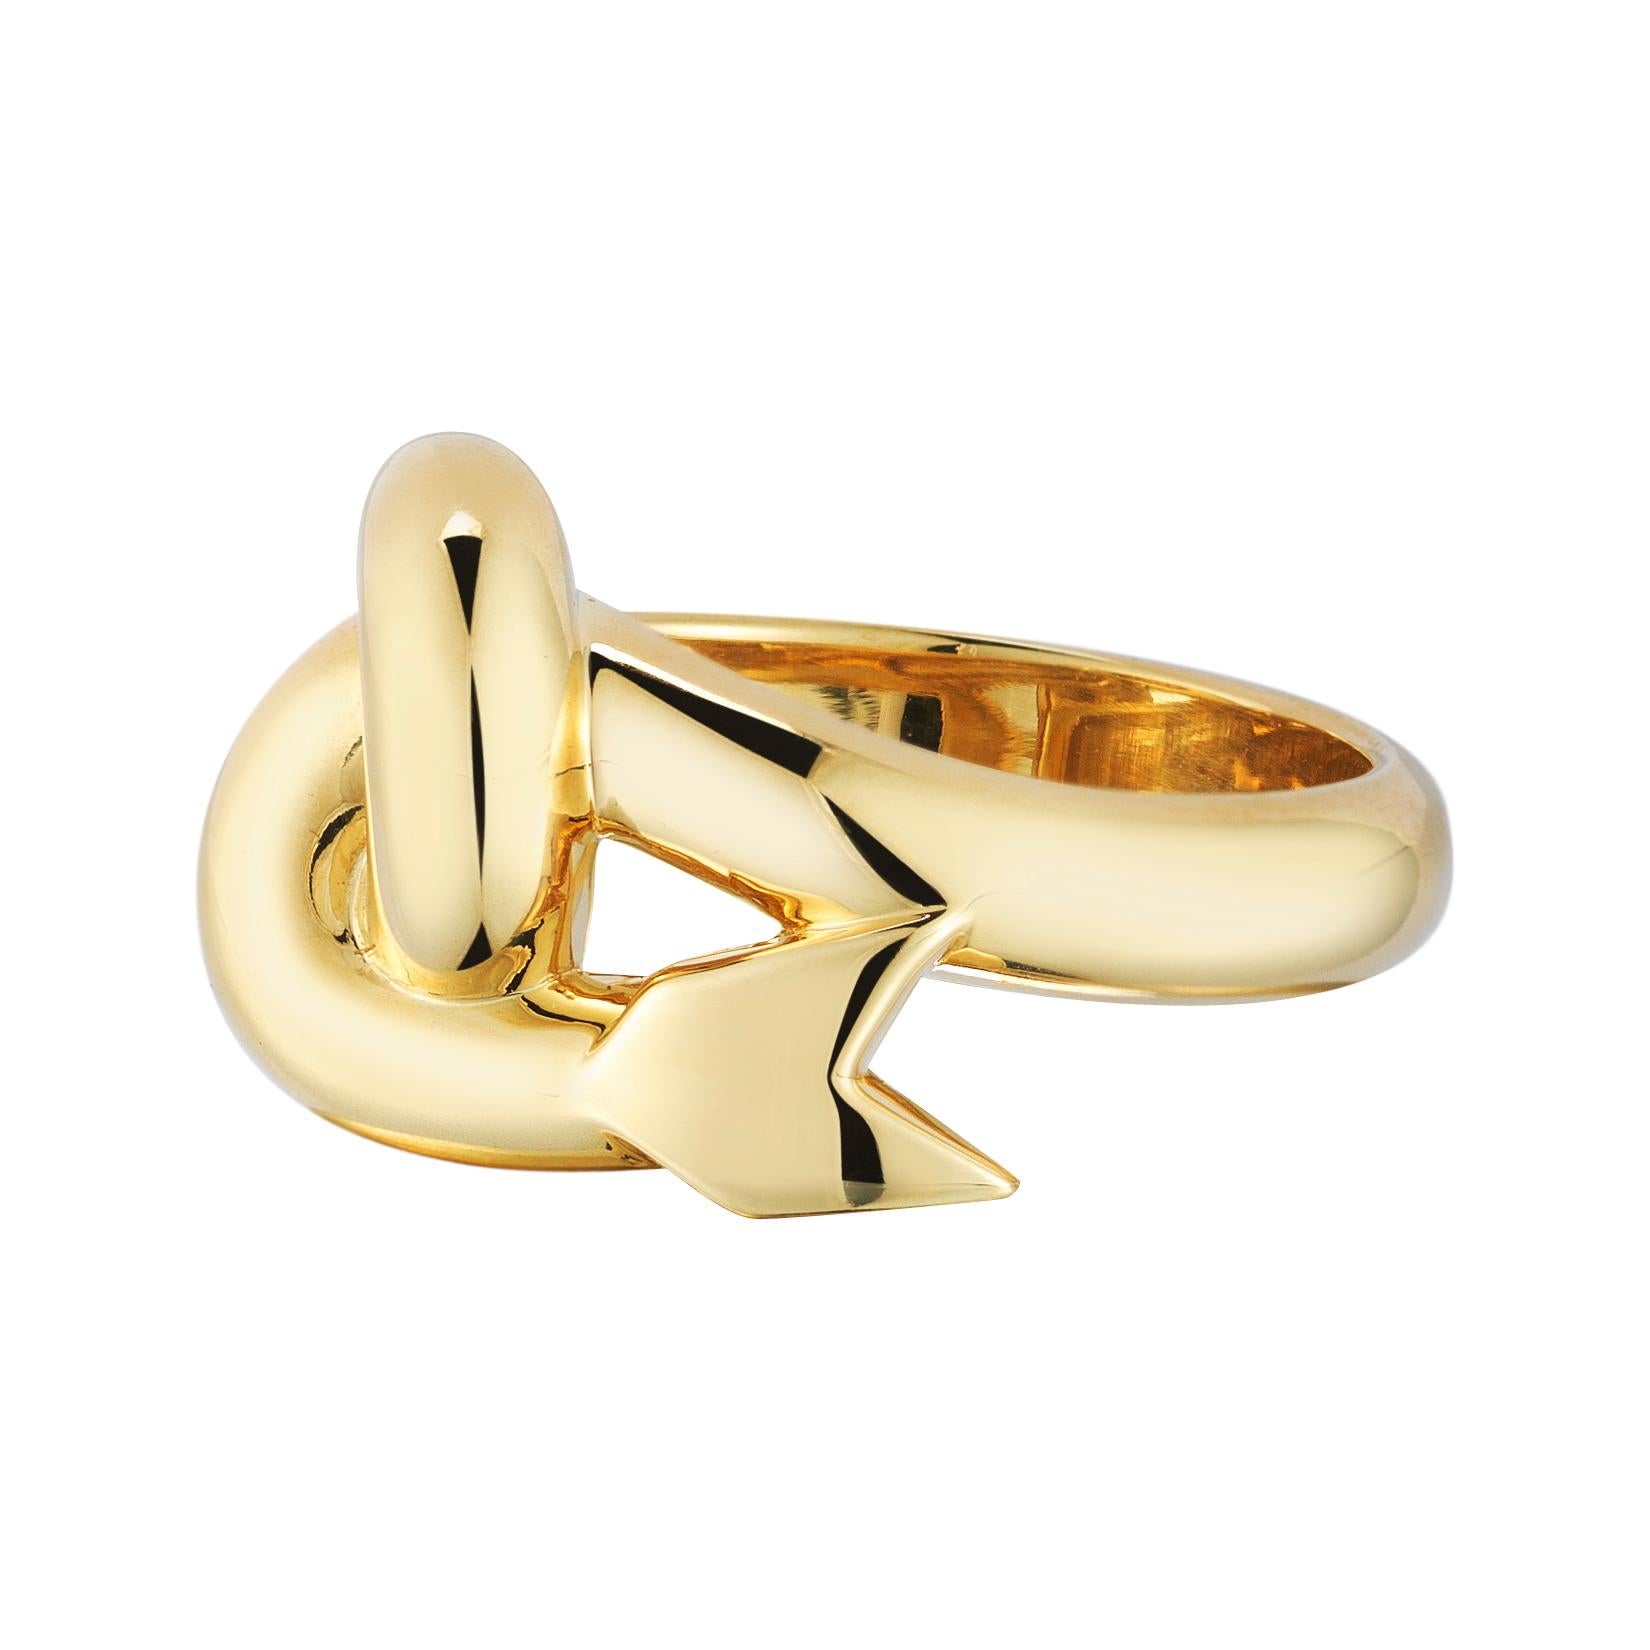 A jumbo 18 karat gold arrow cocktail ring, inspired by bulbous jewelry of the 1980's. A twist on our classic Arrow Ring. The ring is hefty and high polished. 